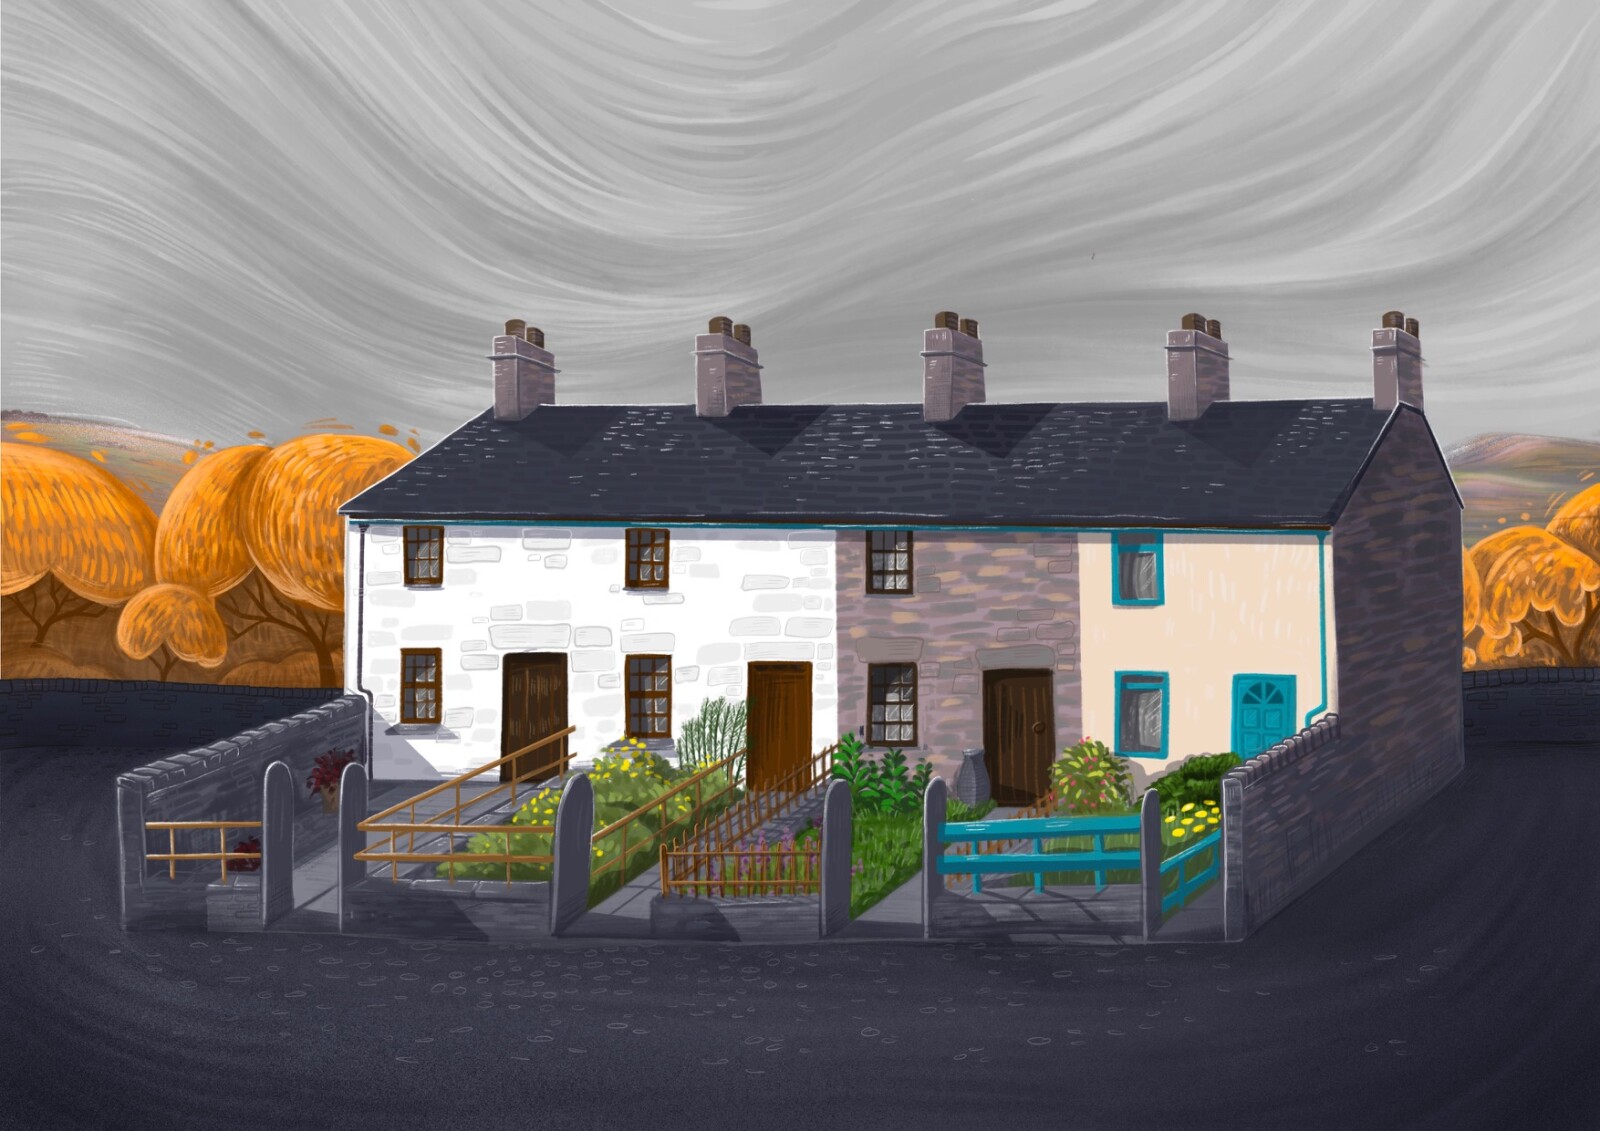 Painted picture of the Fron Haul row of houses